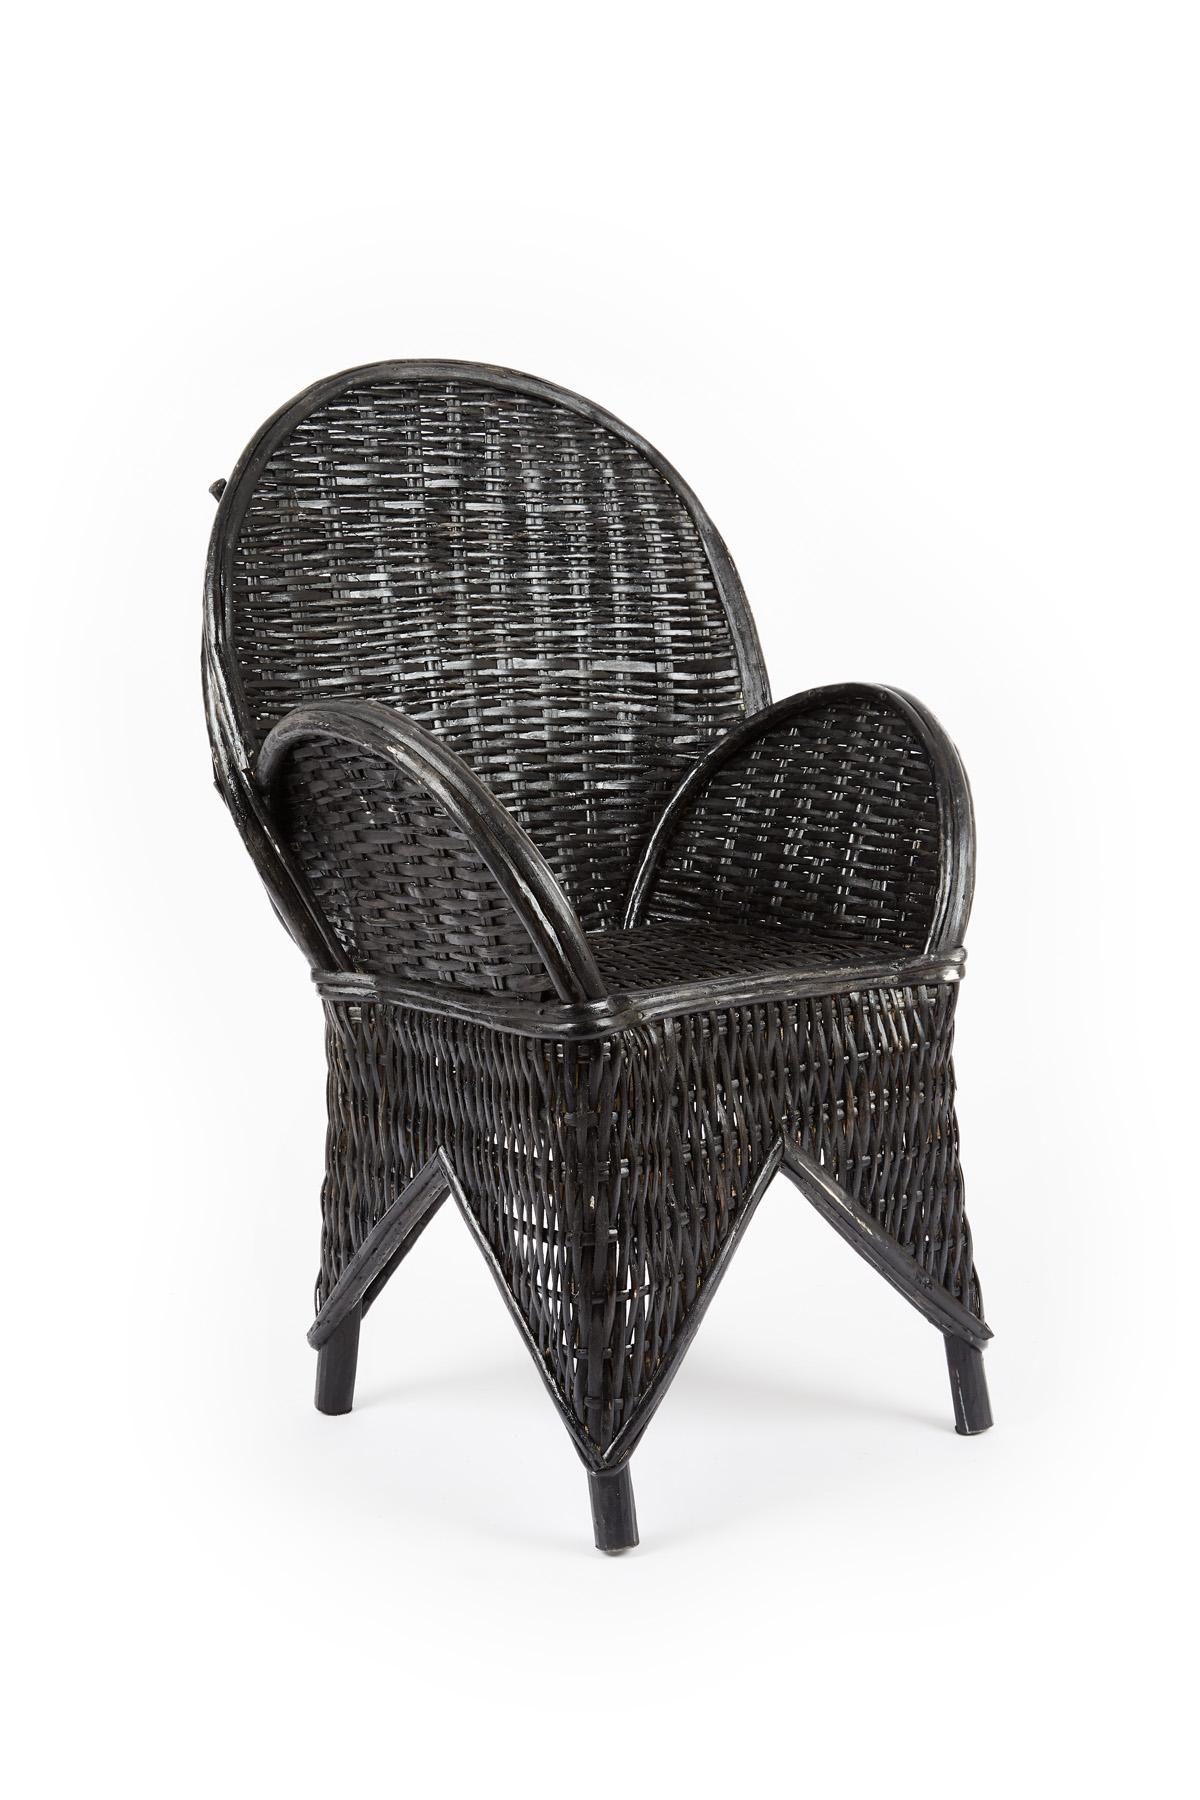 Pair of wicker chairs handmade in Morocco with natural wicker and painted in black. Uniquely crafted in Morocco, these chairs have a uniquely sculptural design and a solid structure offering a comfortable seat.
Additional colors available upon